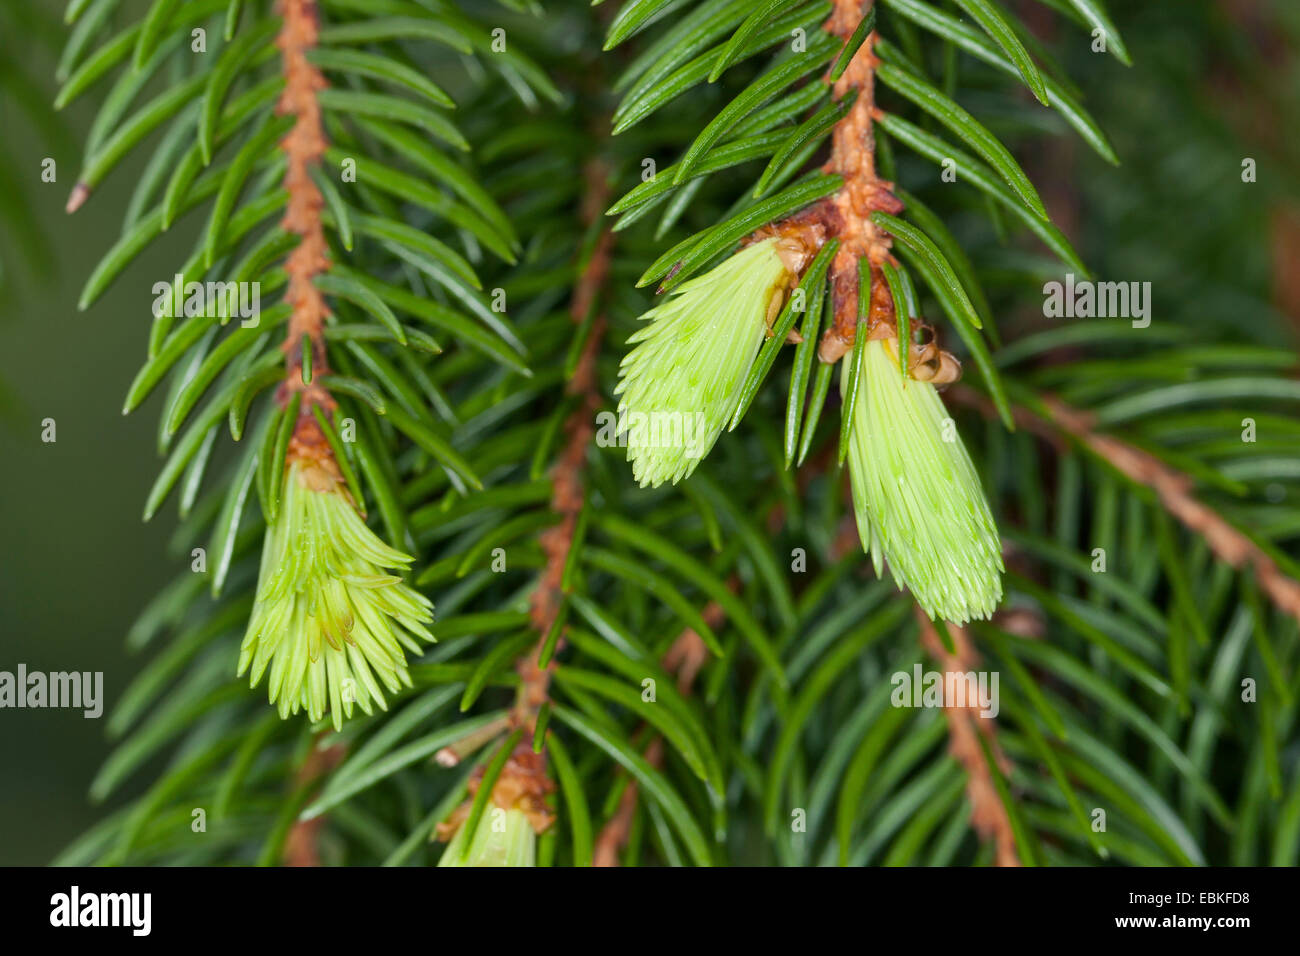 Norway spruce (Picea abies), young shootings, Germany Stock Photo